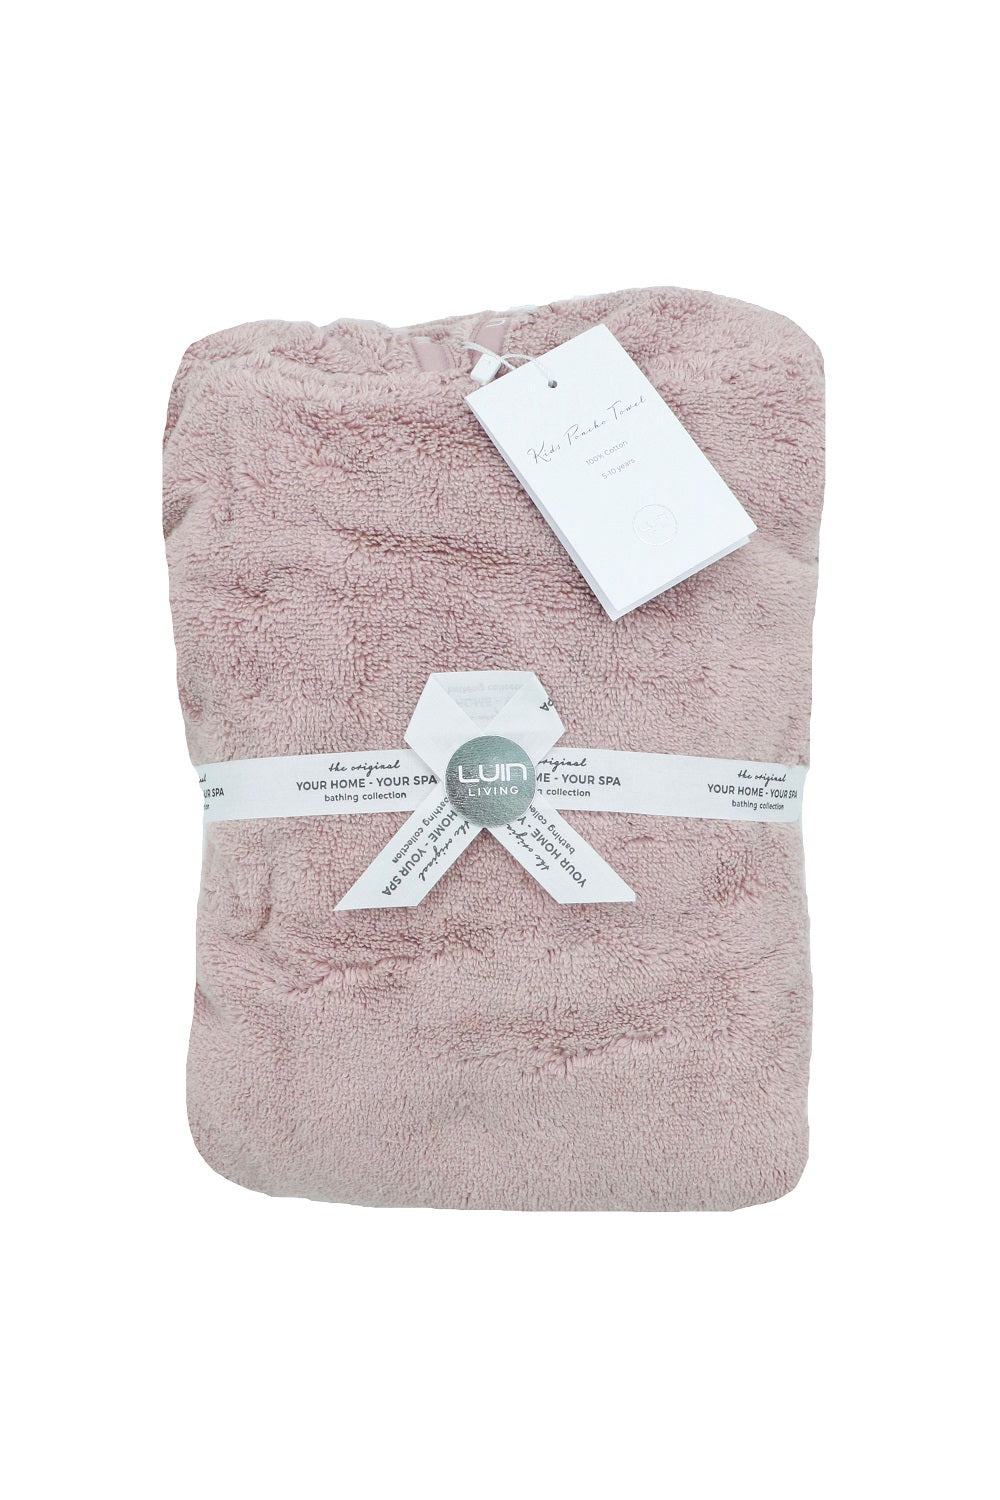 Luin Living Poncho towel, 4 different sizes, Dusty Rose